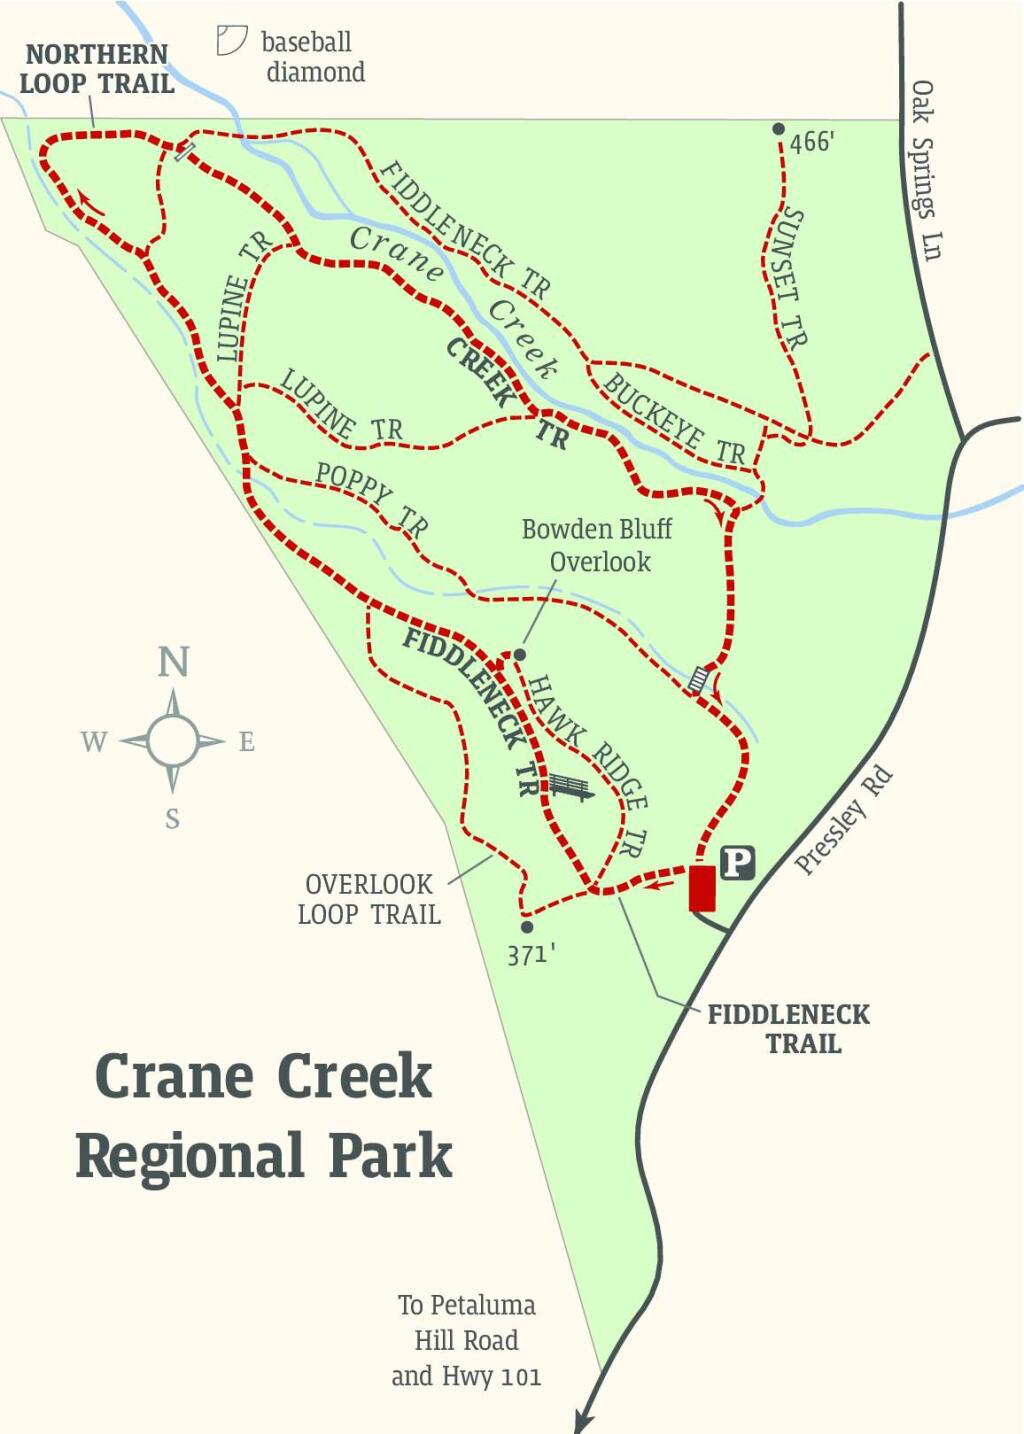 Beth Schlanker / The PRess Democrat, 2015Crane Creek Regional Park near Rohnert Park allows horses and dogs on leashes. It also features a disc golf course.